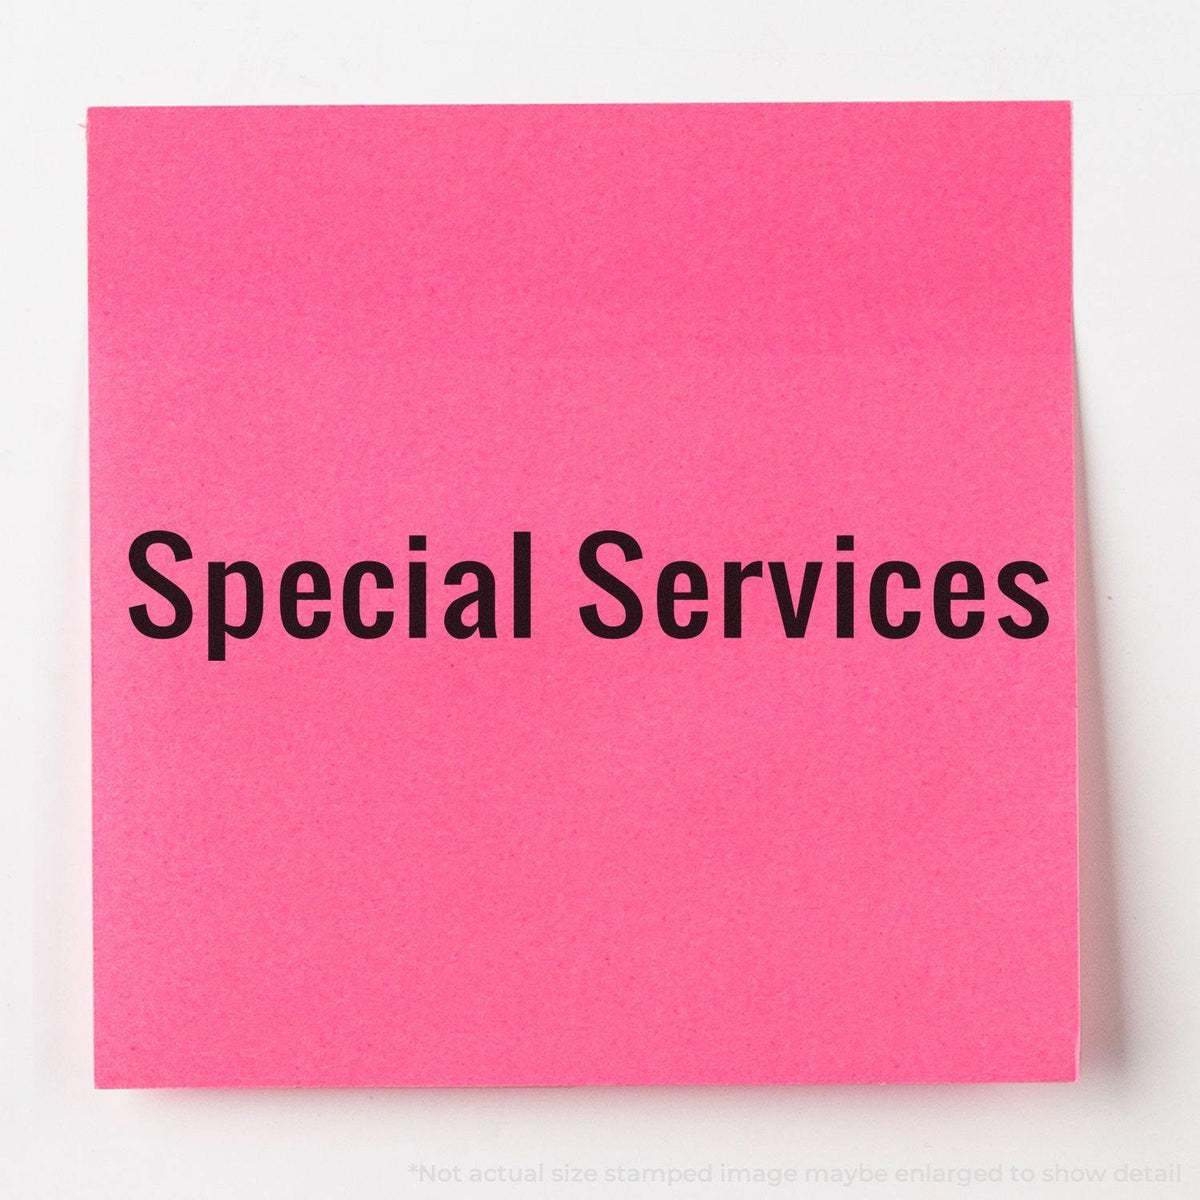 In Use Special Services Rubber Stamp Image